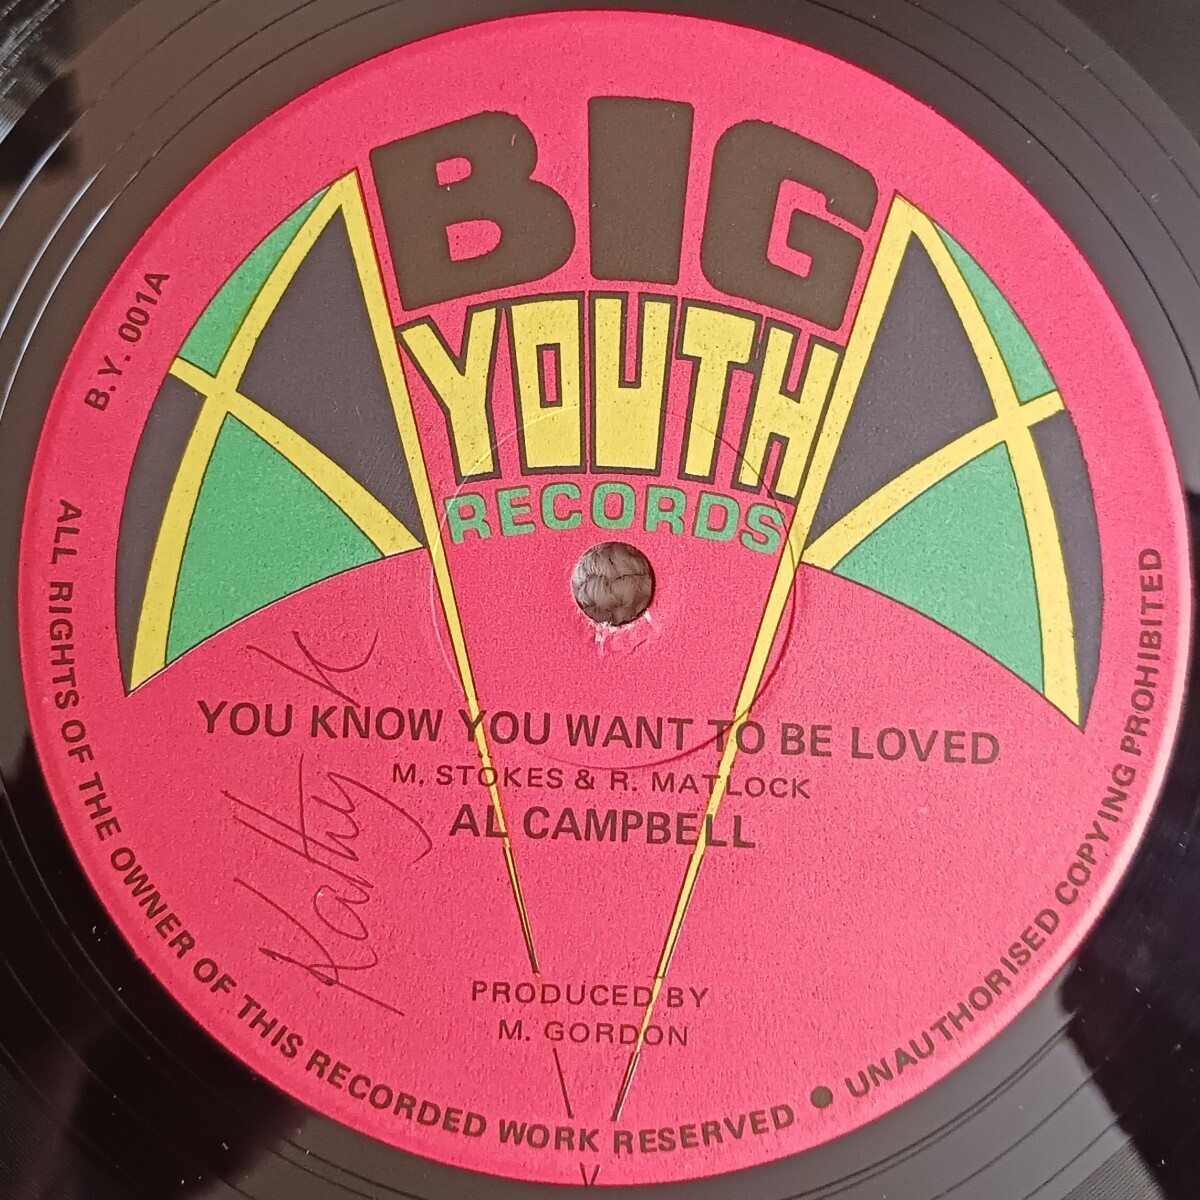 AL CAMPBELL『YOU KNOW YOU WANT TO BE LOVED』１２インチシングルレコード / BIG YOUTH / B.Y.001 / LOVERS ROCK / ラヴァーズ・ロックの画像1